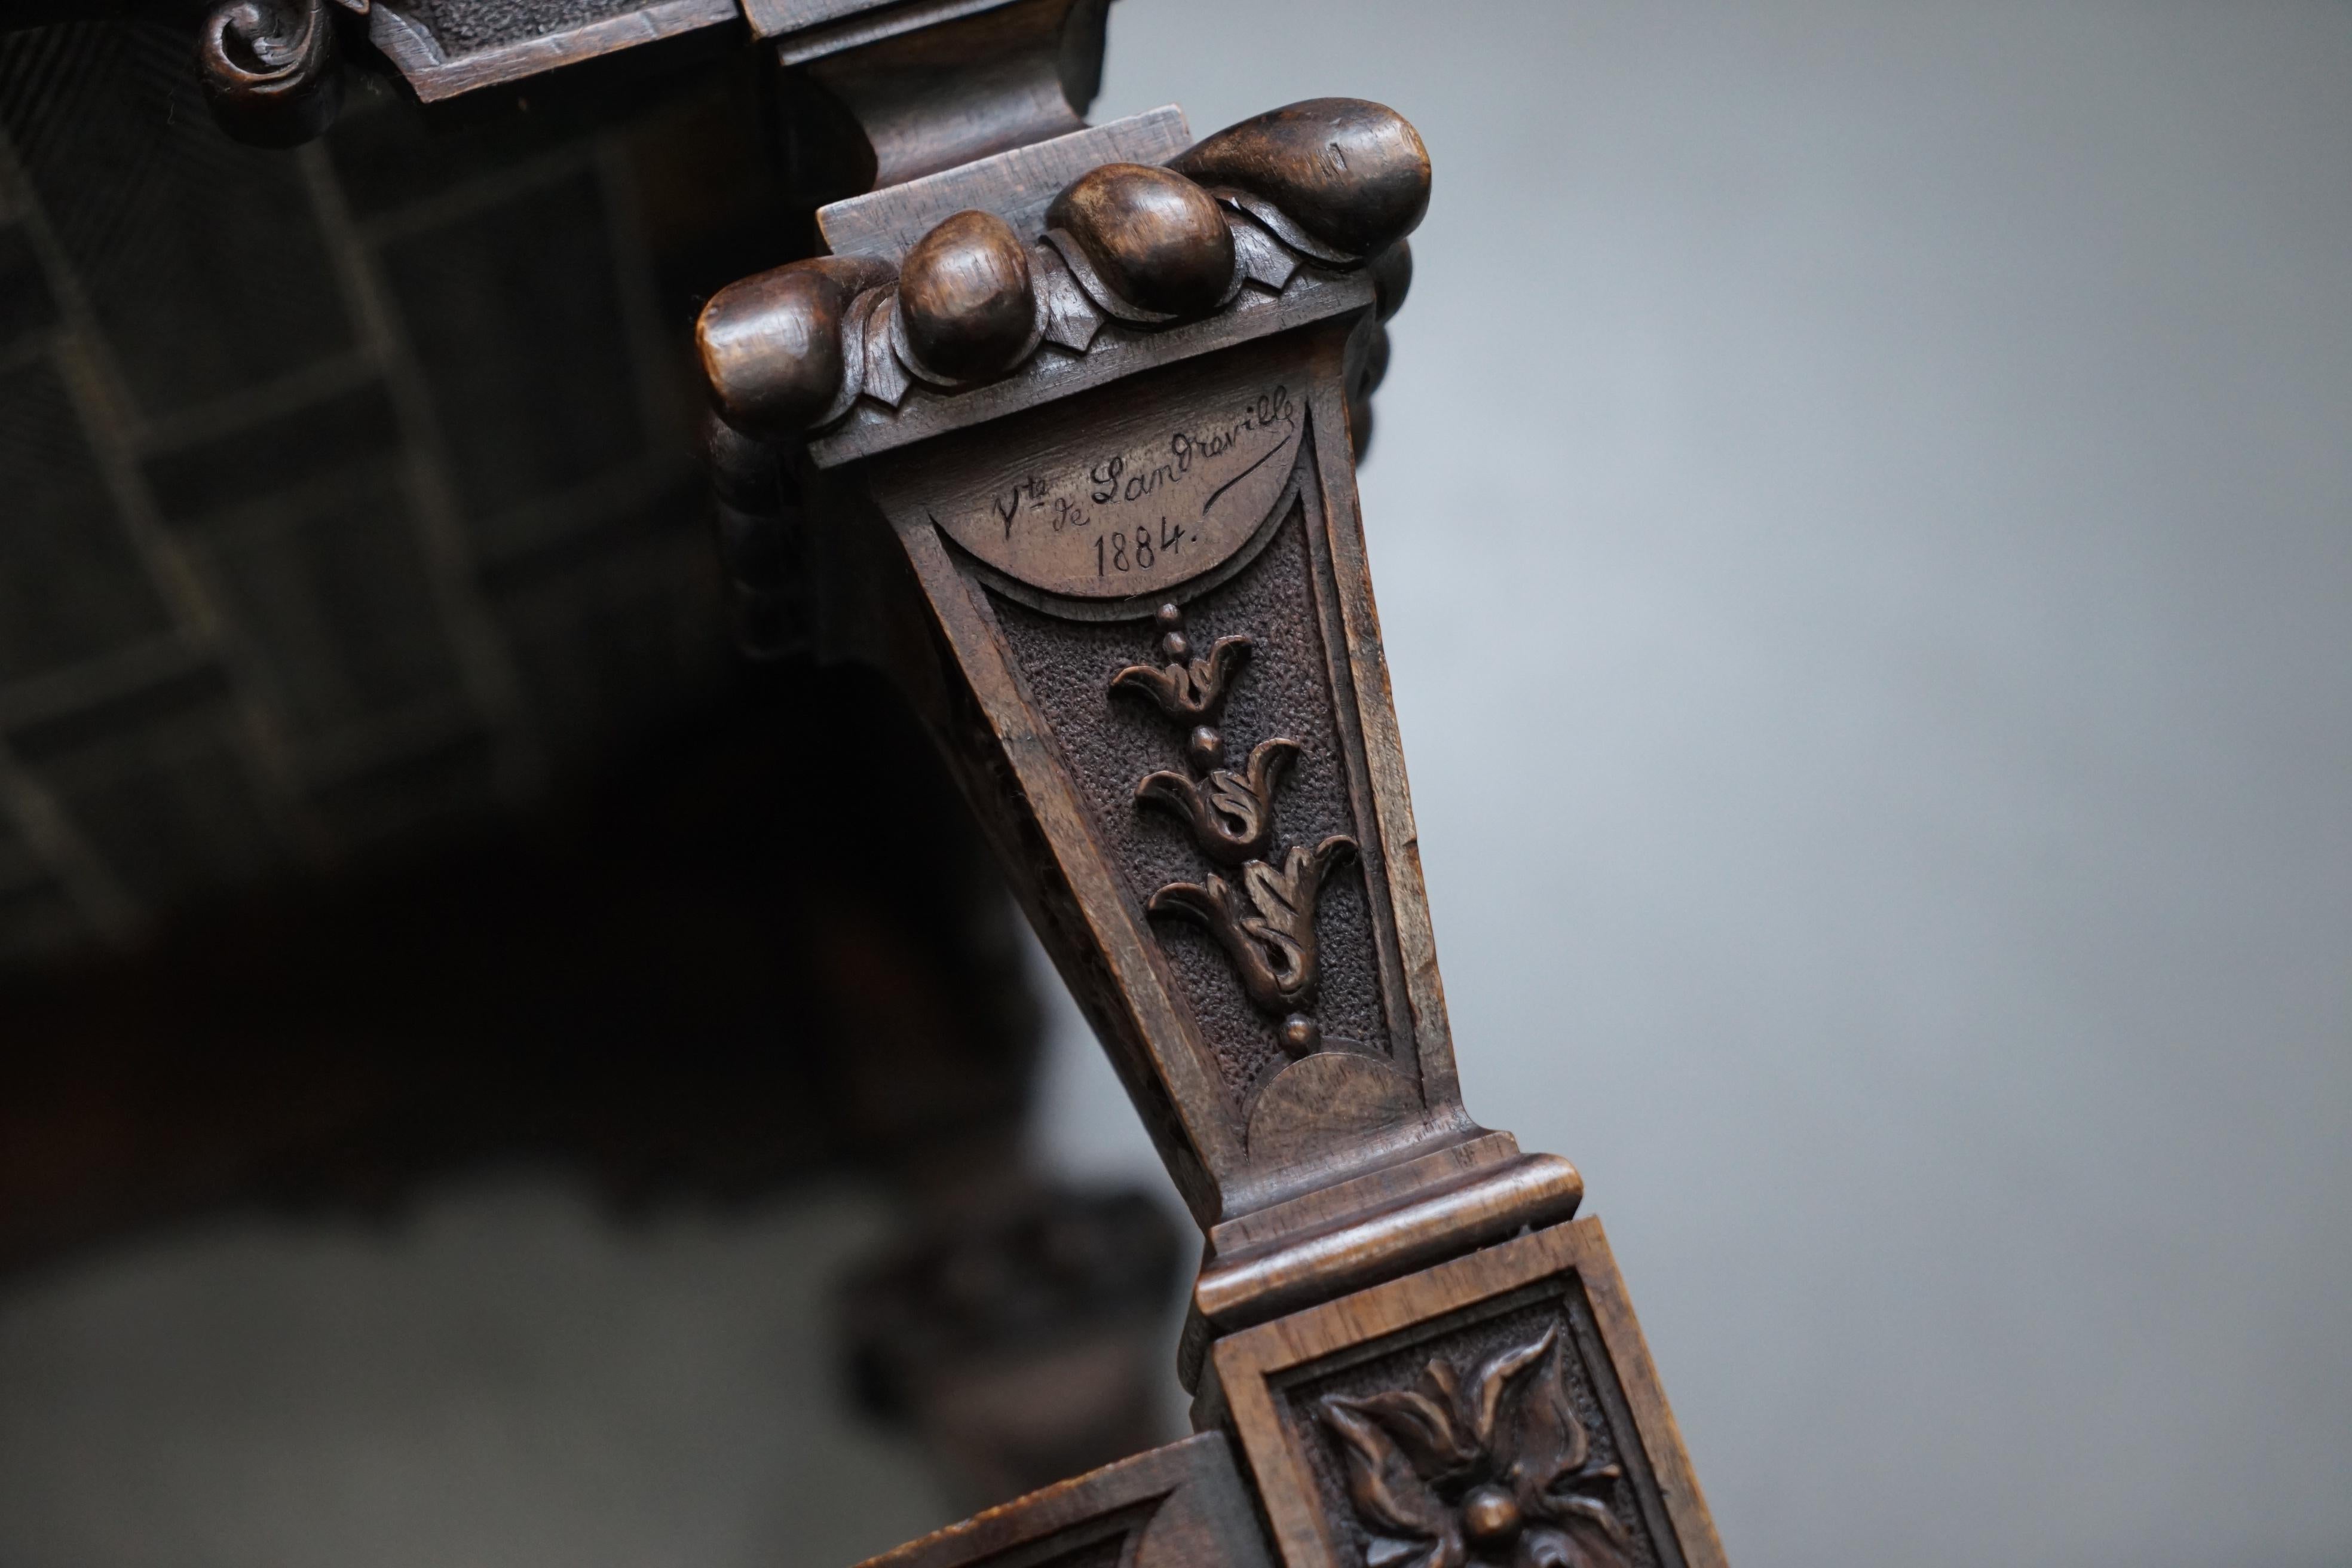 We are delighted to offer for sale this very rare one of a kind estate made Chateau De Landreville 1884 hand carved walnut stool

Chateau De Landreville is situated in the Champagne Ardenne district of France and is a turreted stone built,